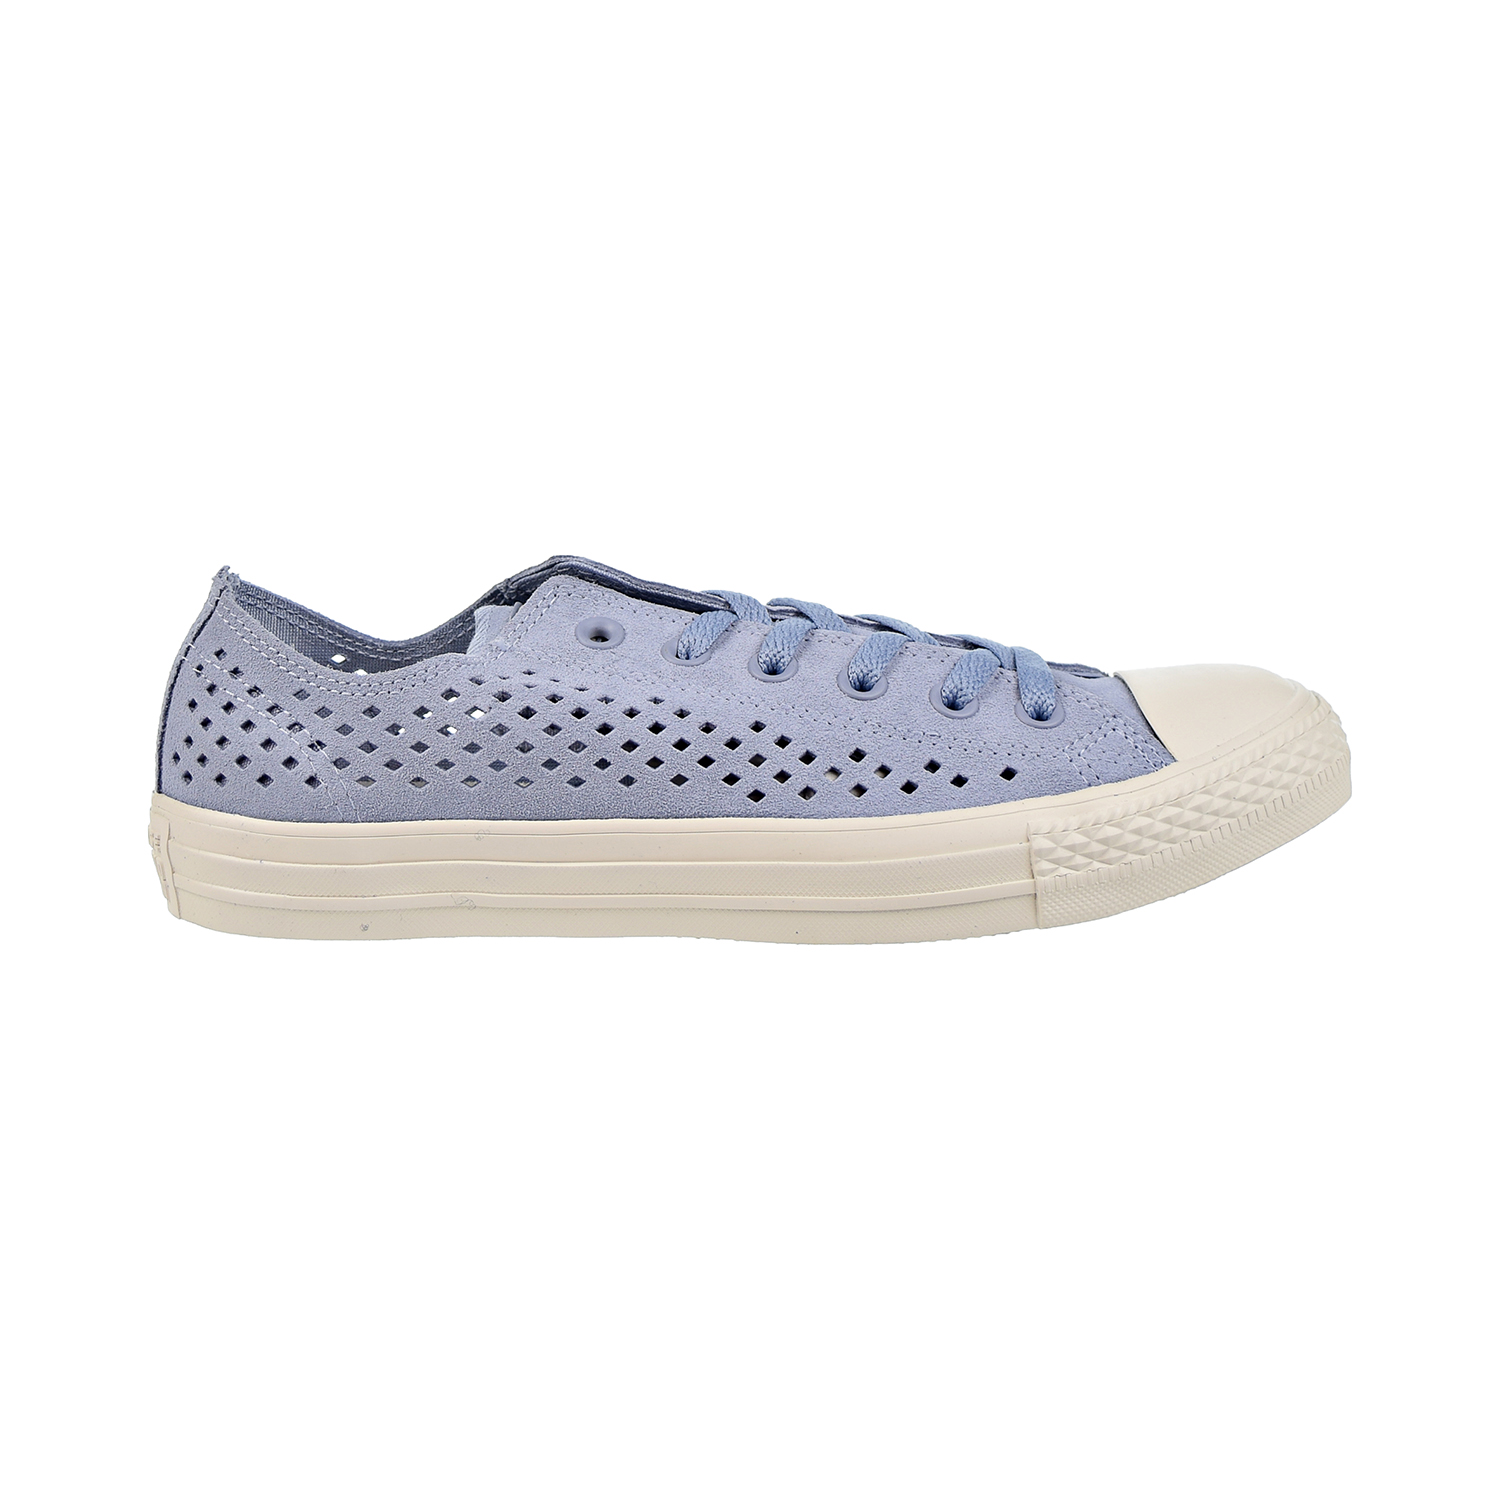 Converse Chuck Taylor All Star Ox Men's Shoes Perforated Glacier Grey 160461c (4.5 M US)